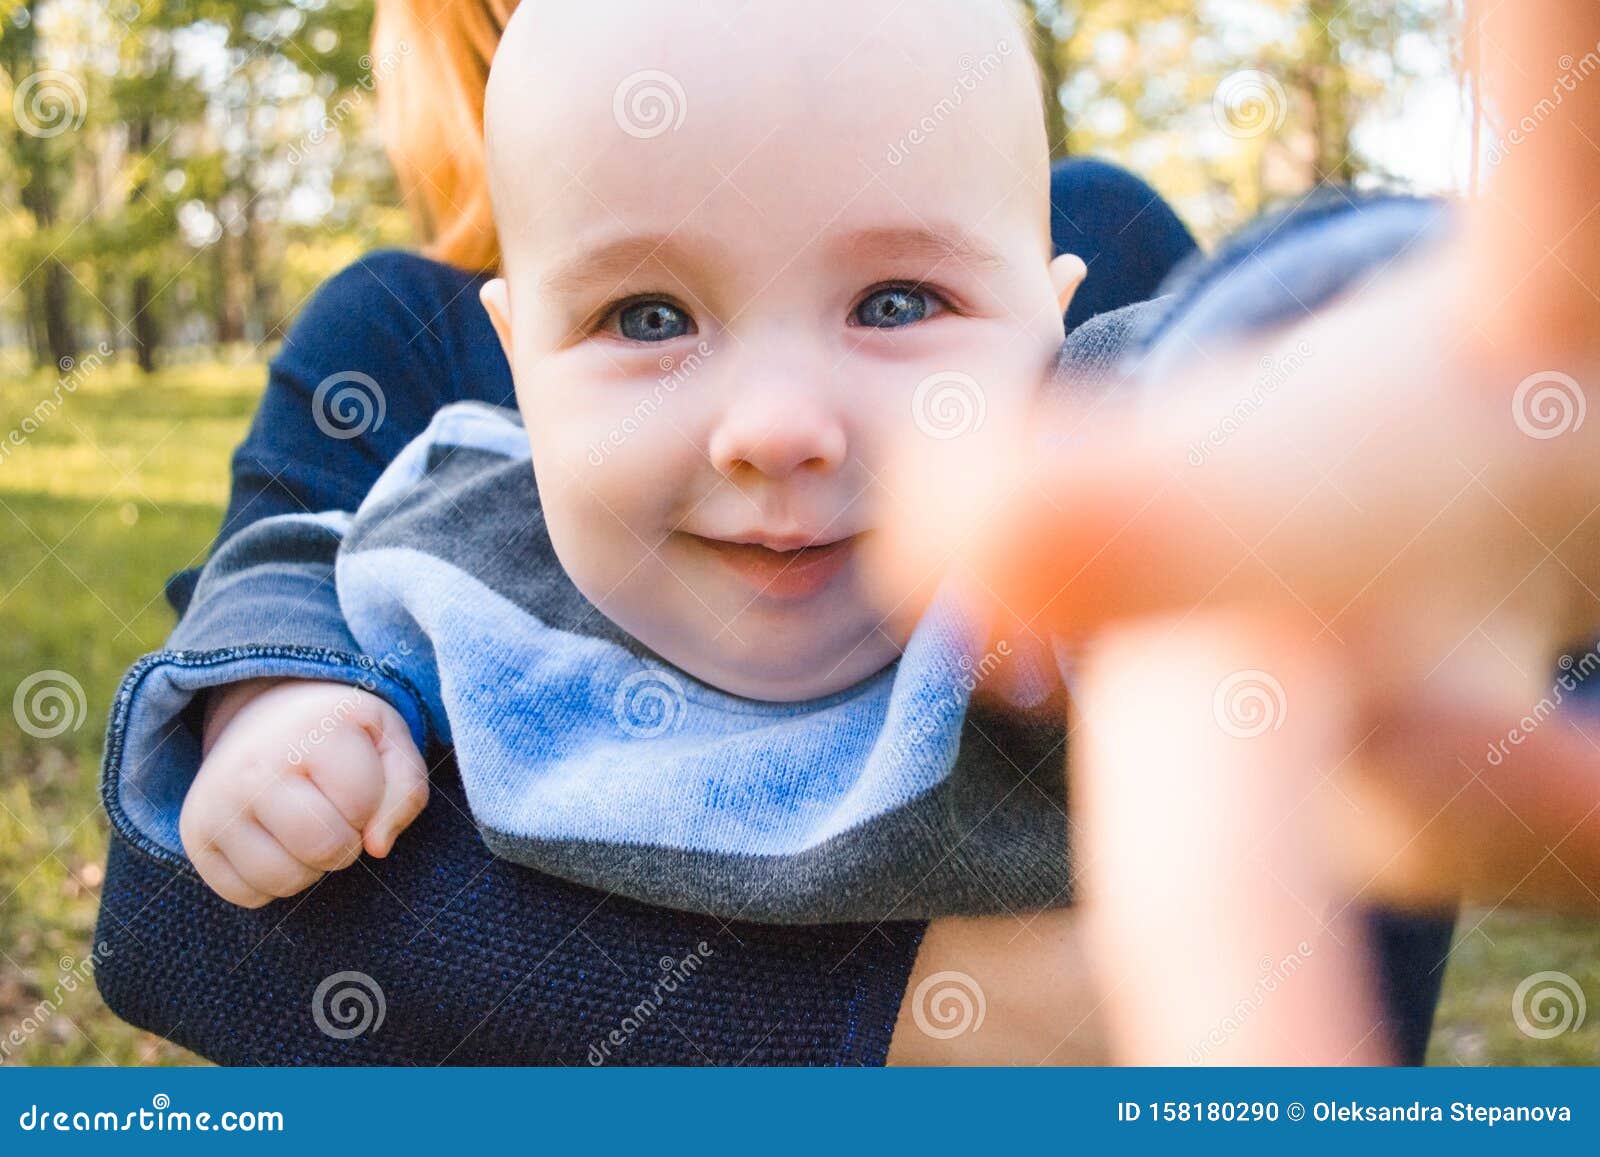 Cute Kid with Blue Eyes in Blue Sweater Stock Photo - Image of little ...